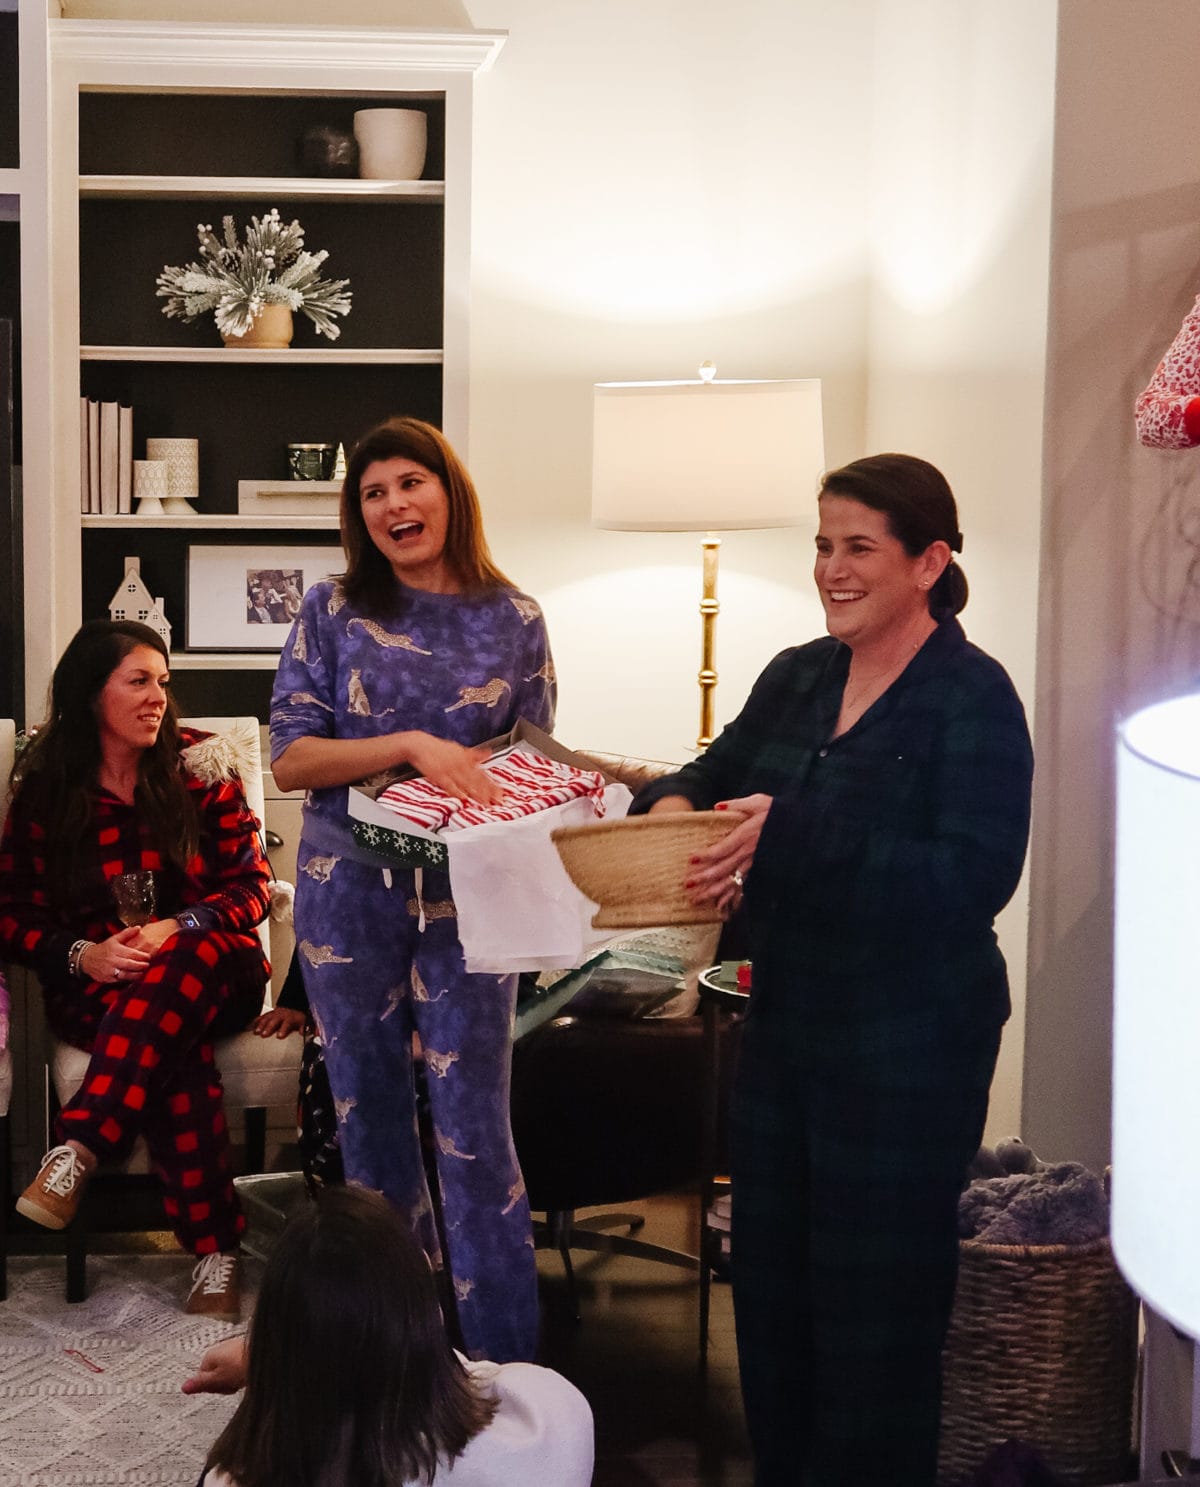 Our Favorite Things Party 2022 – Honey We're Home